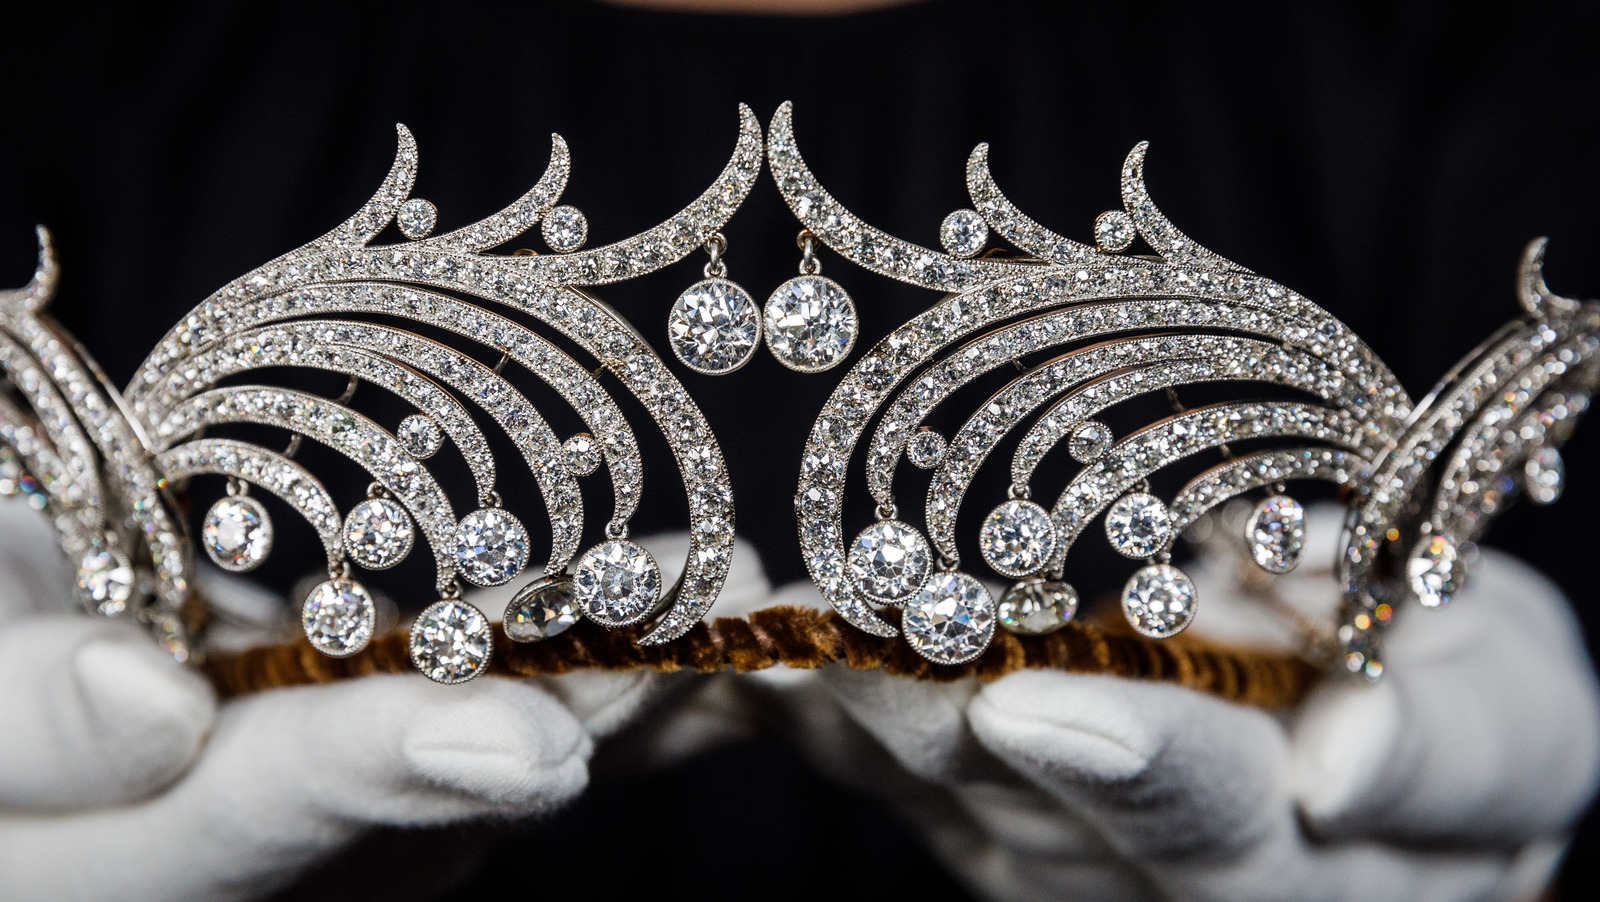 Is There A Difference Between A Tiara And A Crown? - 247 News Around ...